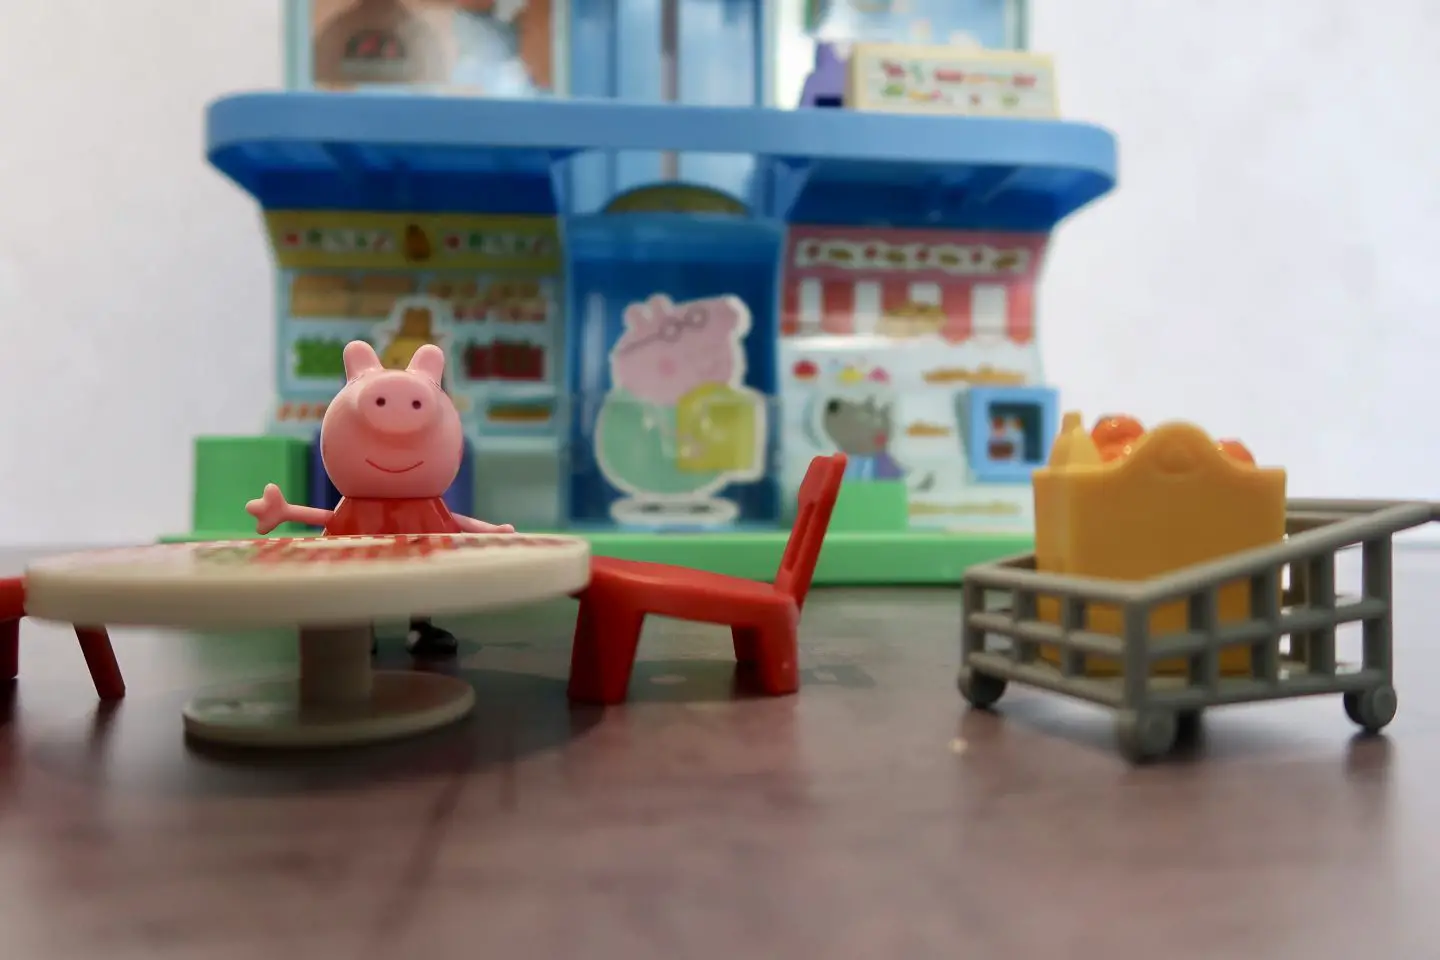 A Peppa Pig figure at a table in front of a Shopping Centre playset